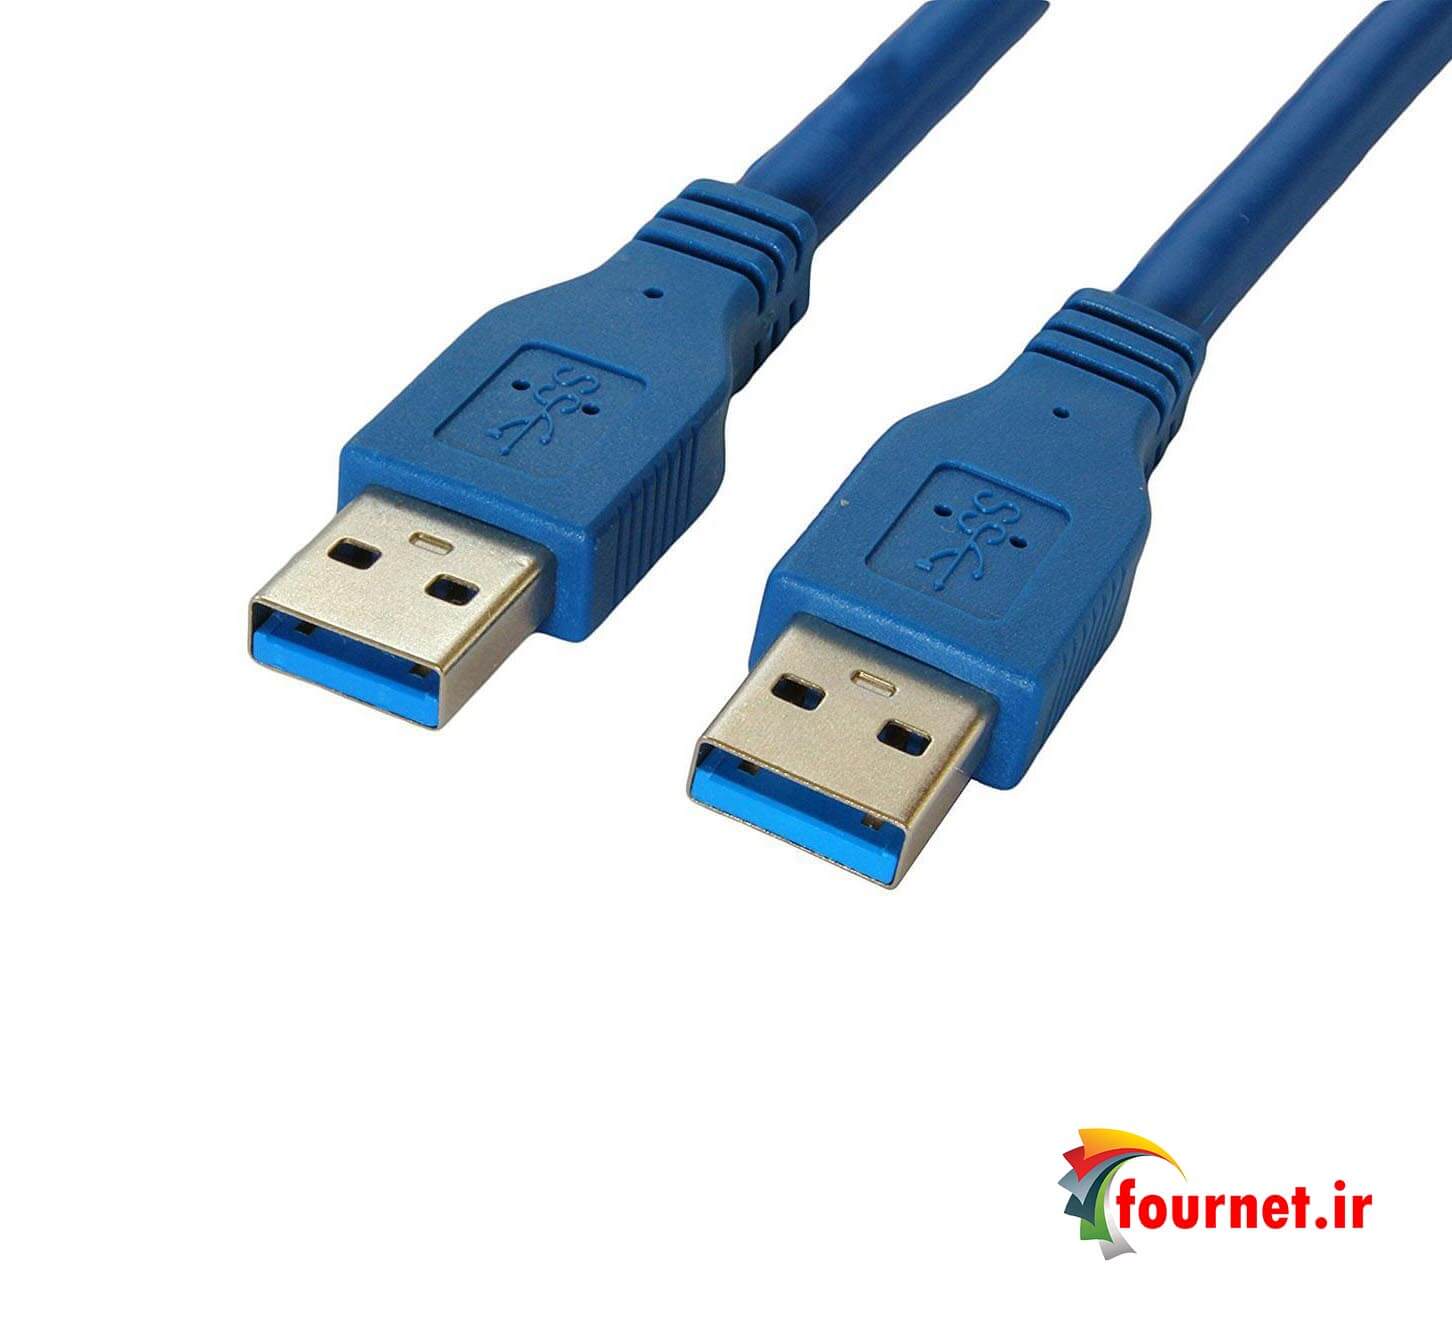 Cable USB to USB3.0 HDD Enet